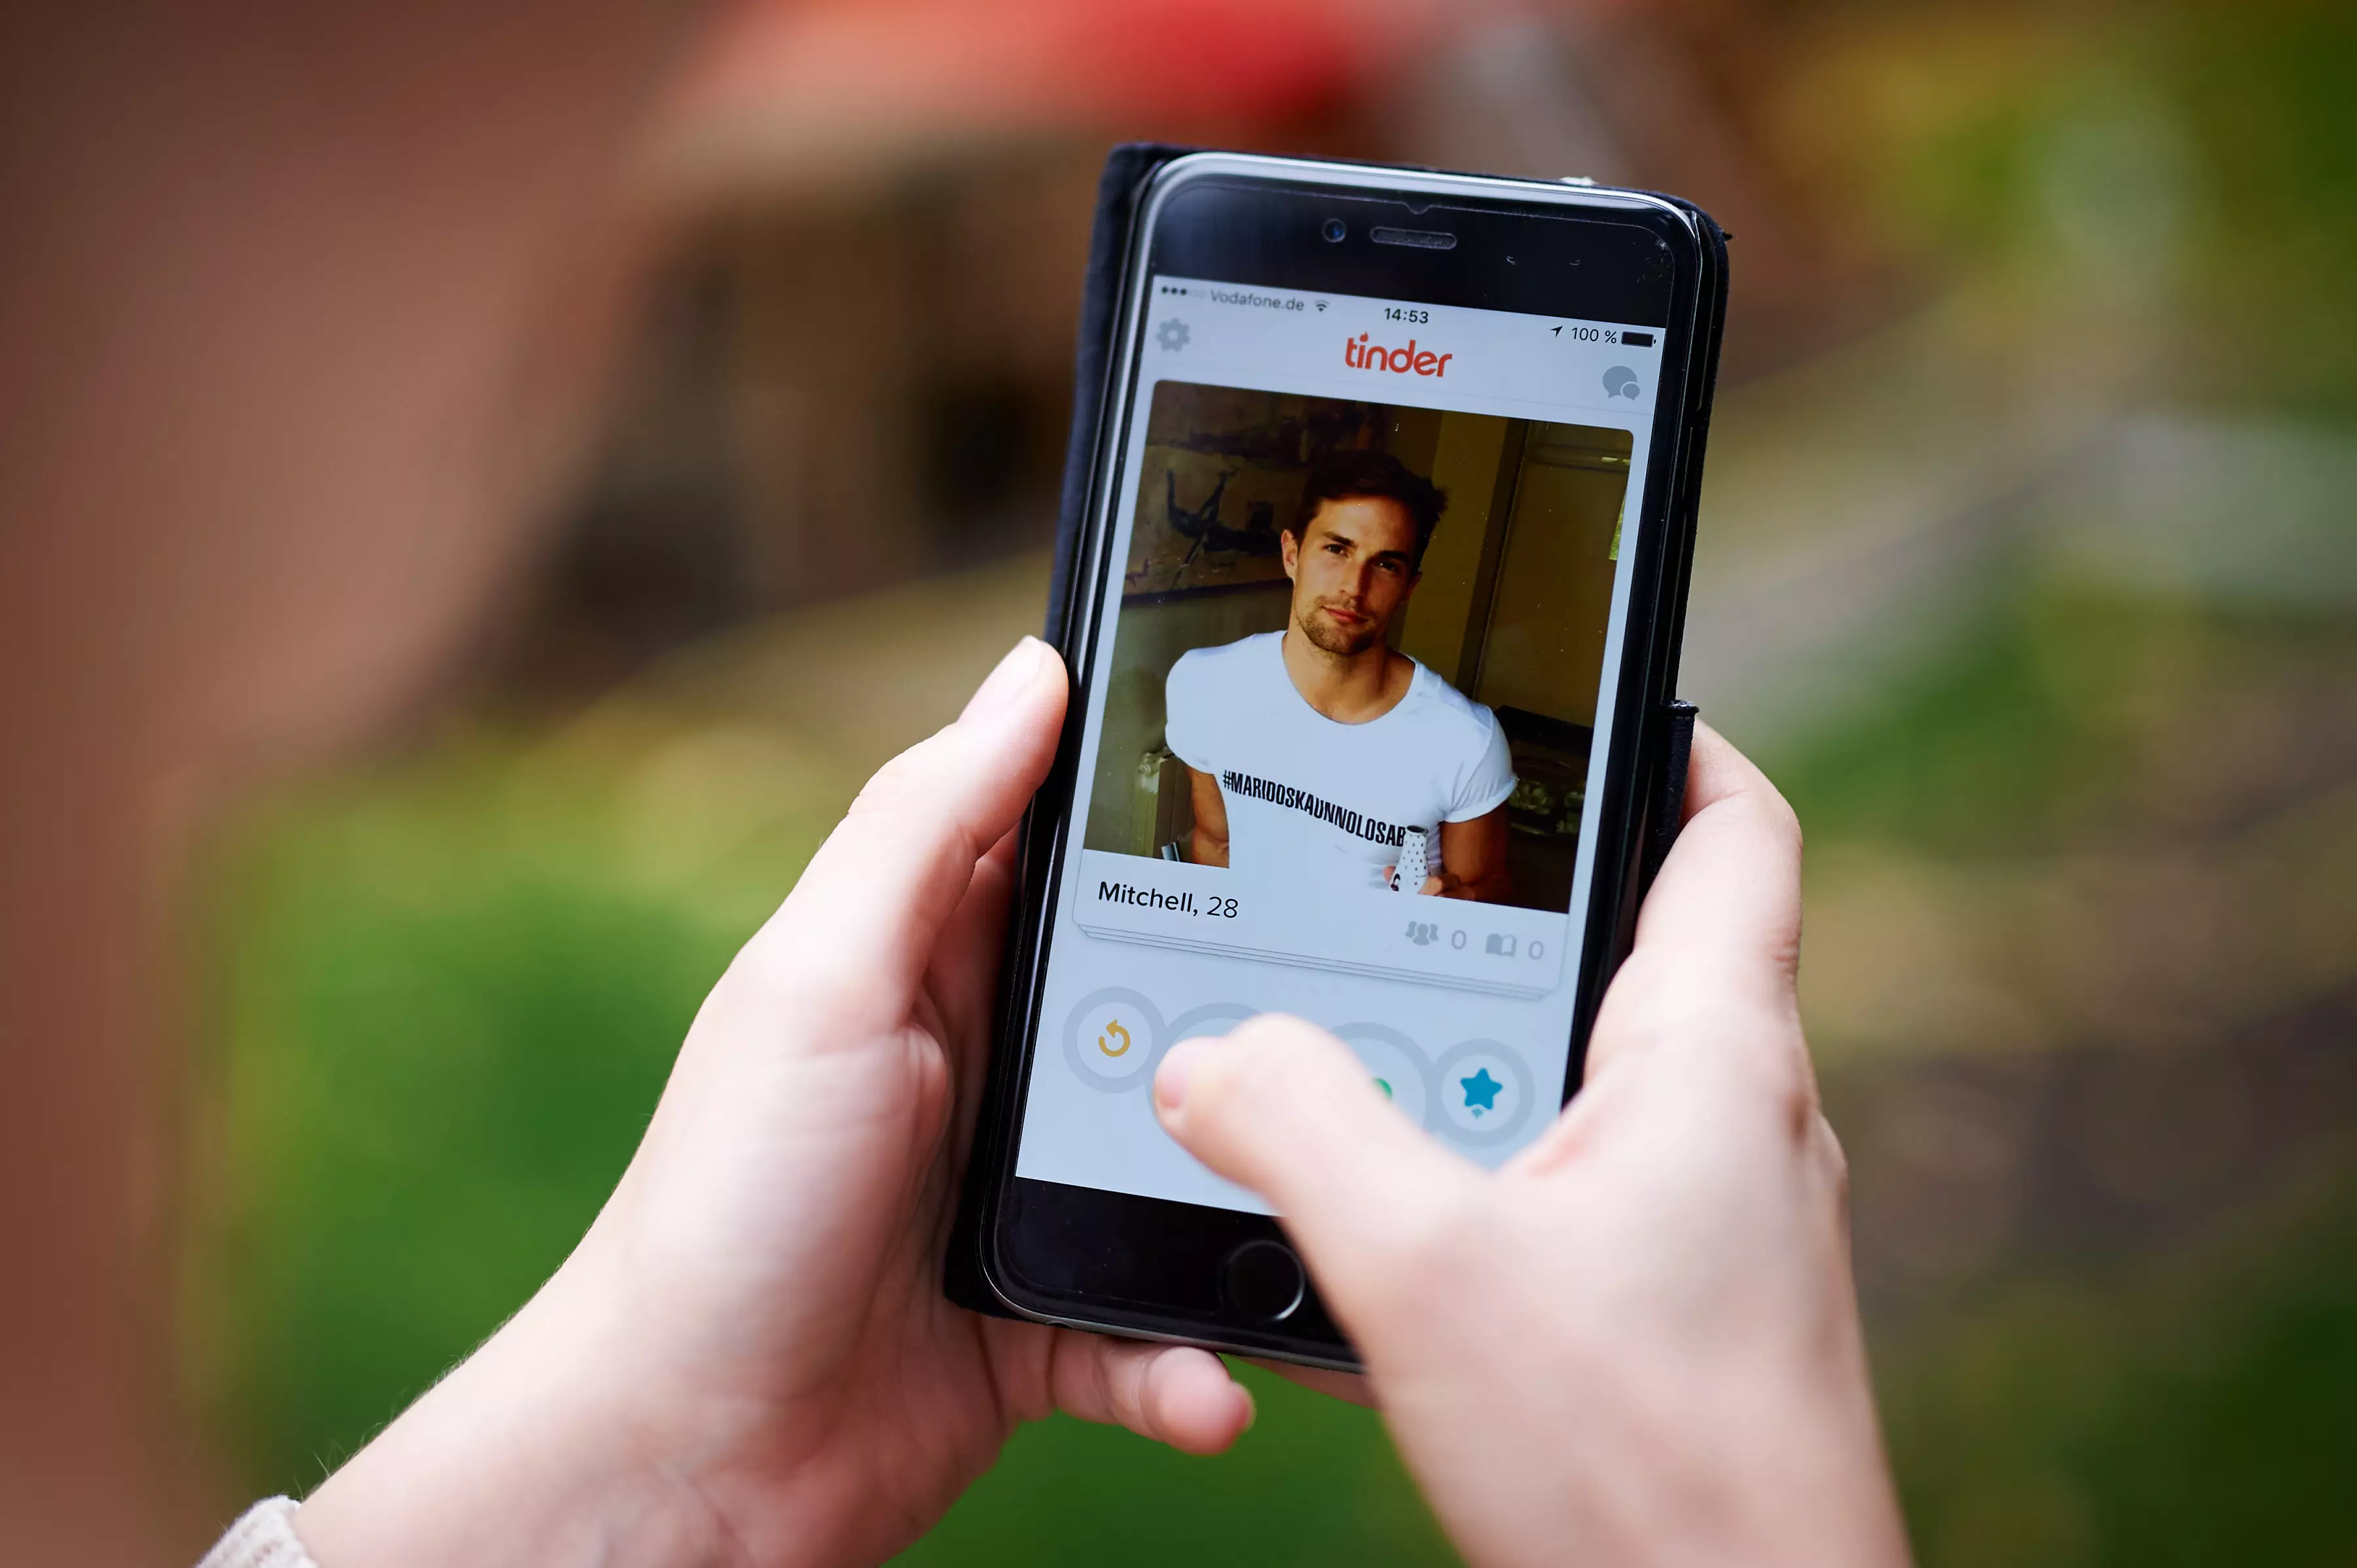 Some of the mainstream dating apps don't work for everyone (